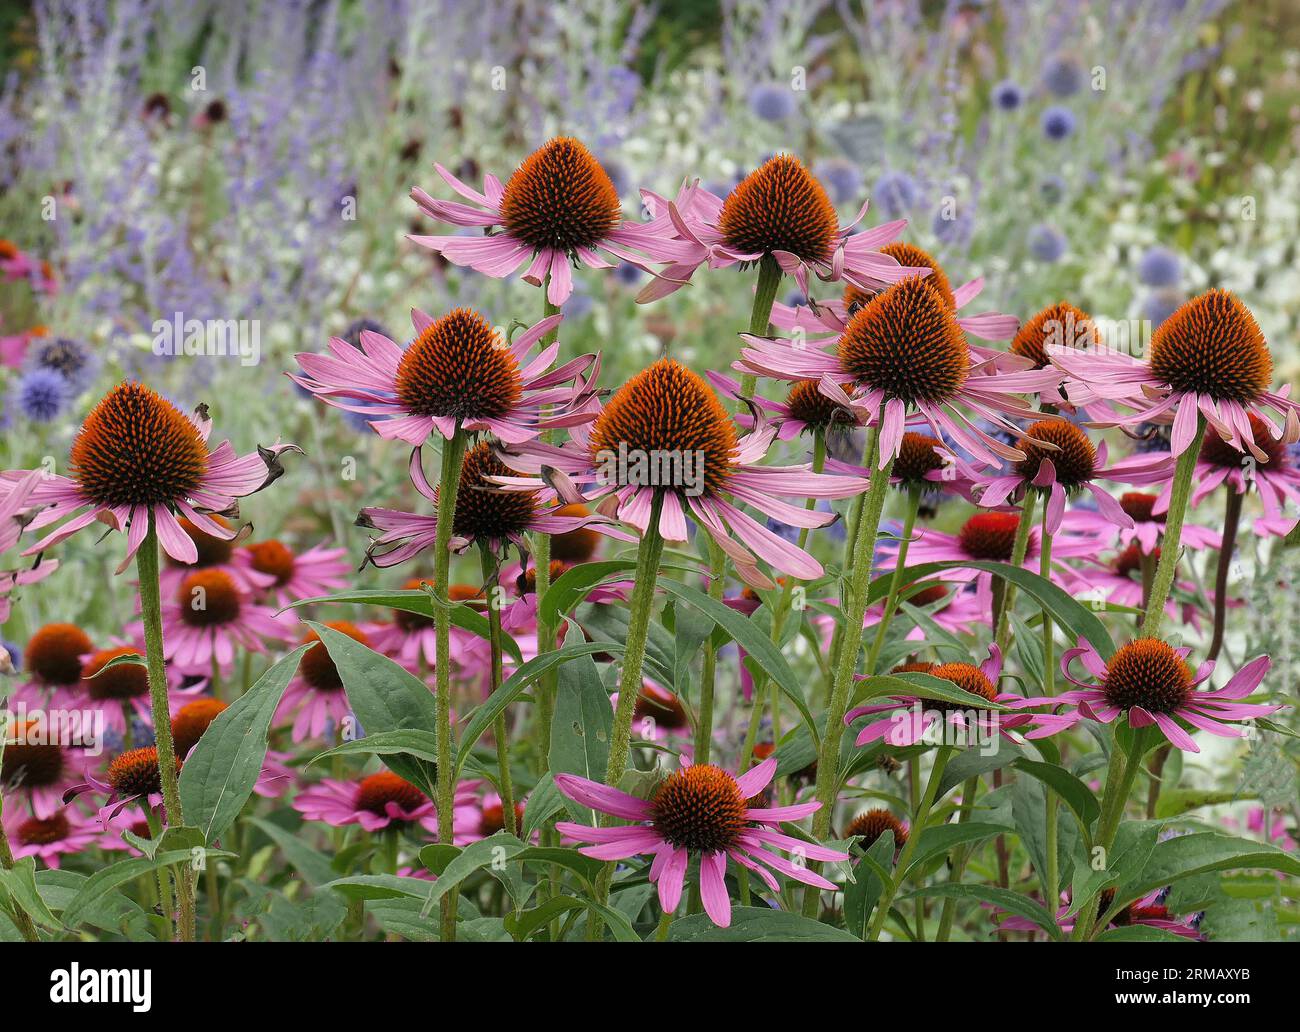 Closeup of the pink petals and orange-brown cone of the summer flowering herbaceous perennial garden plant Echinacea purpurea. Stock Photo